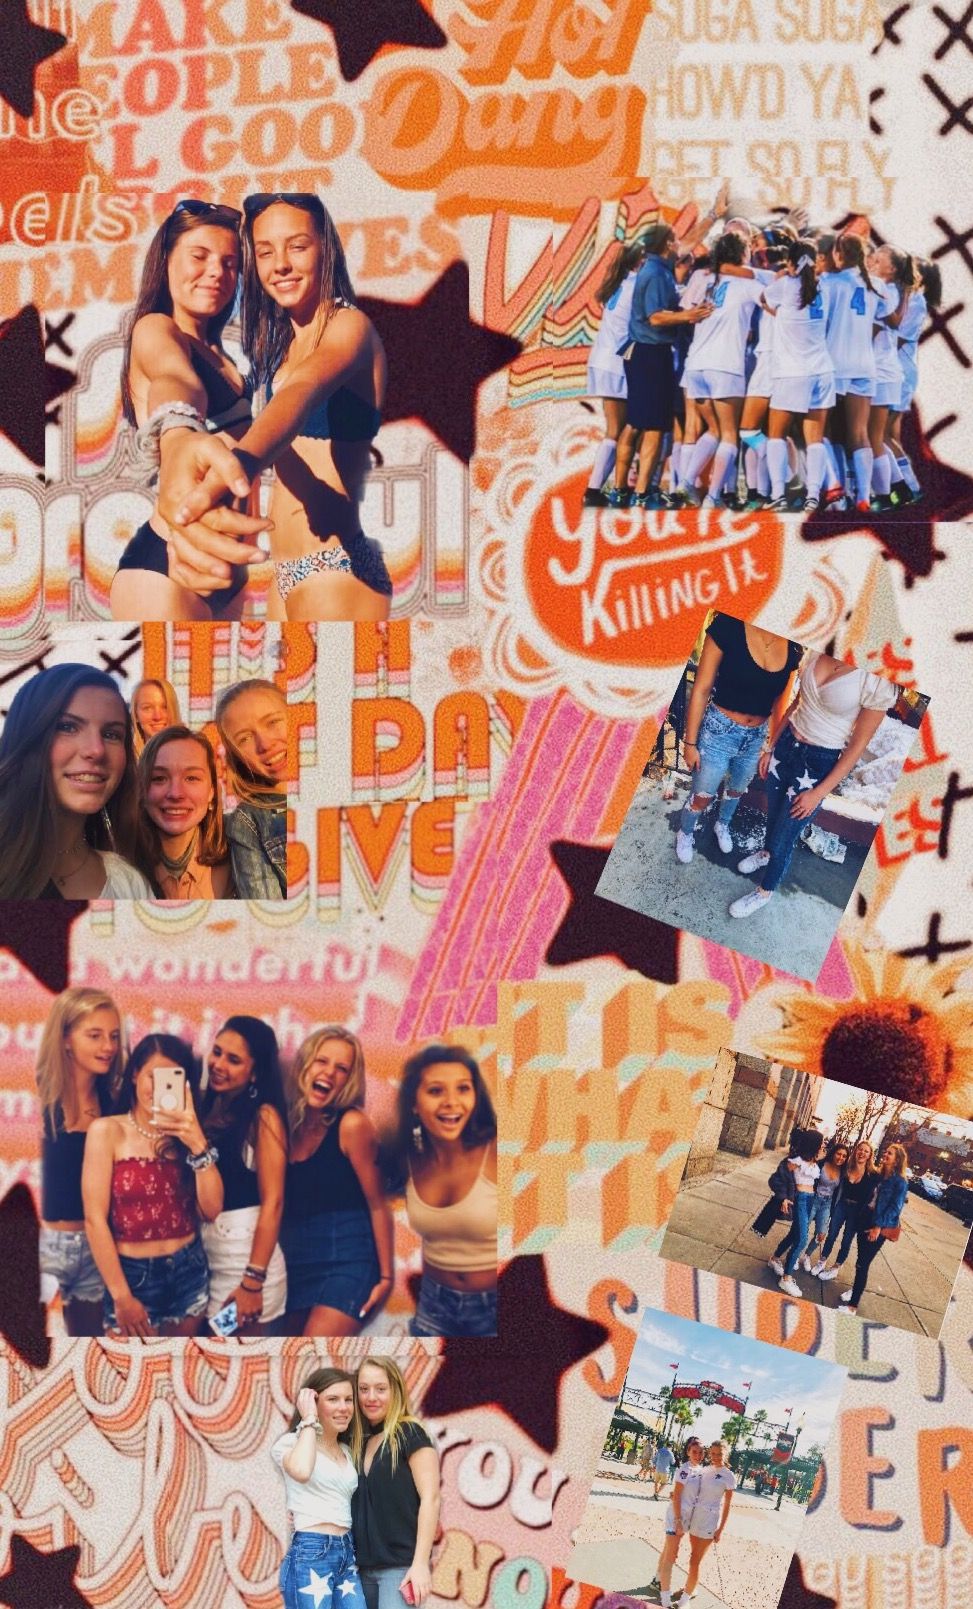 Pic collage, photo collage, happy picture, walls papers, best friends, summer wallpaper. Photo collage, Happy picture, Best friend photo